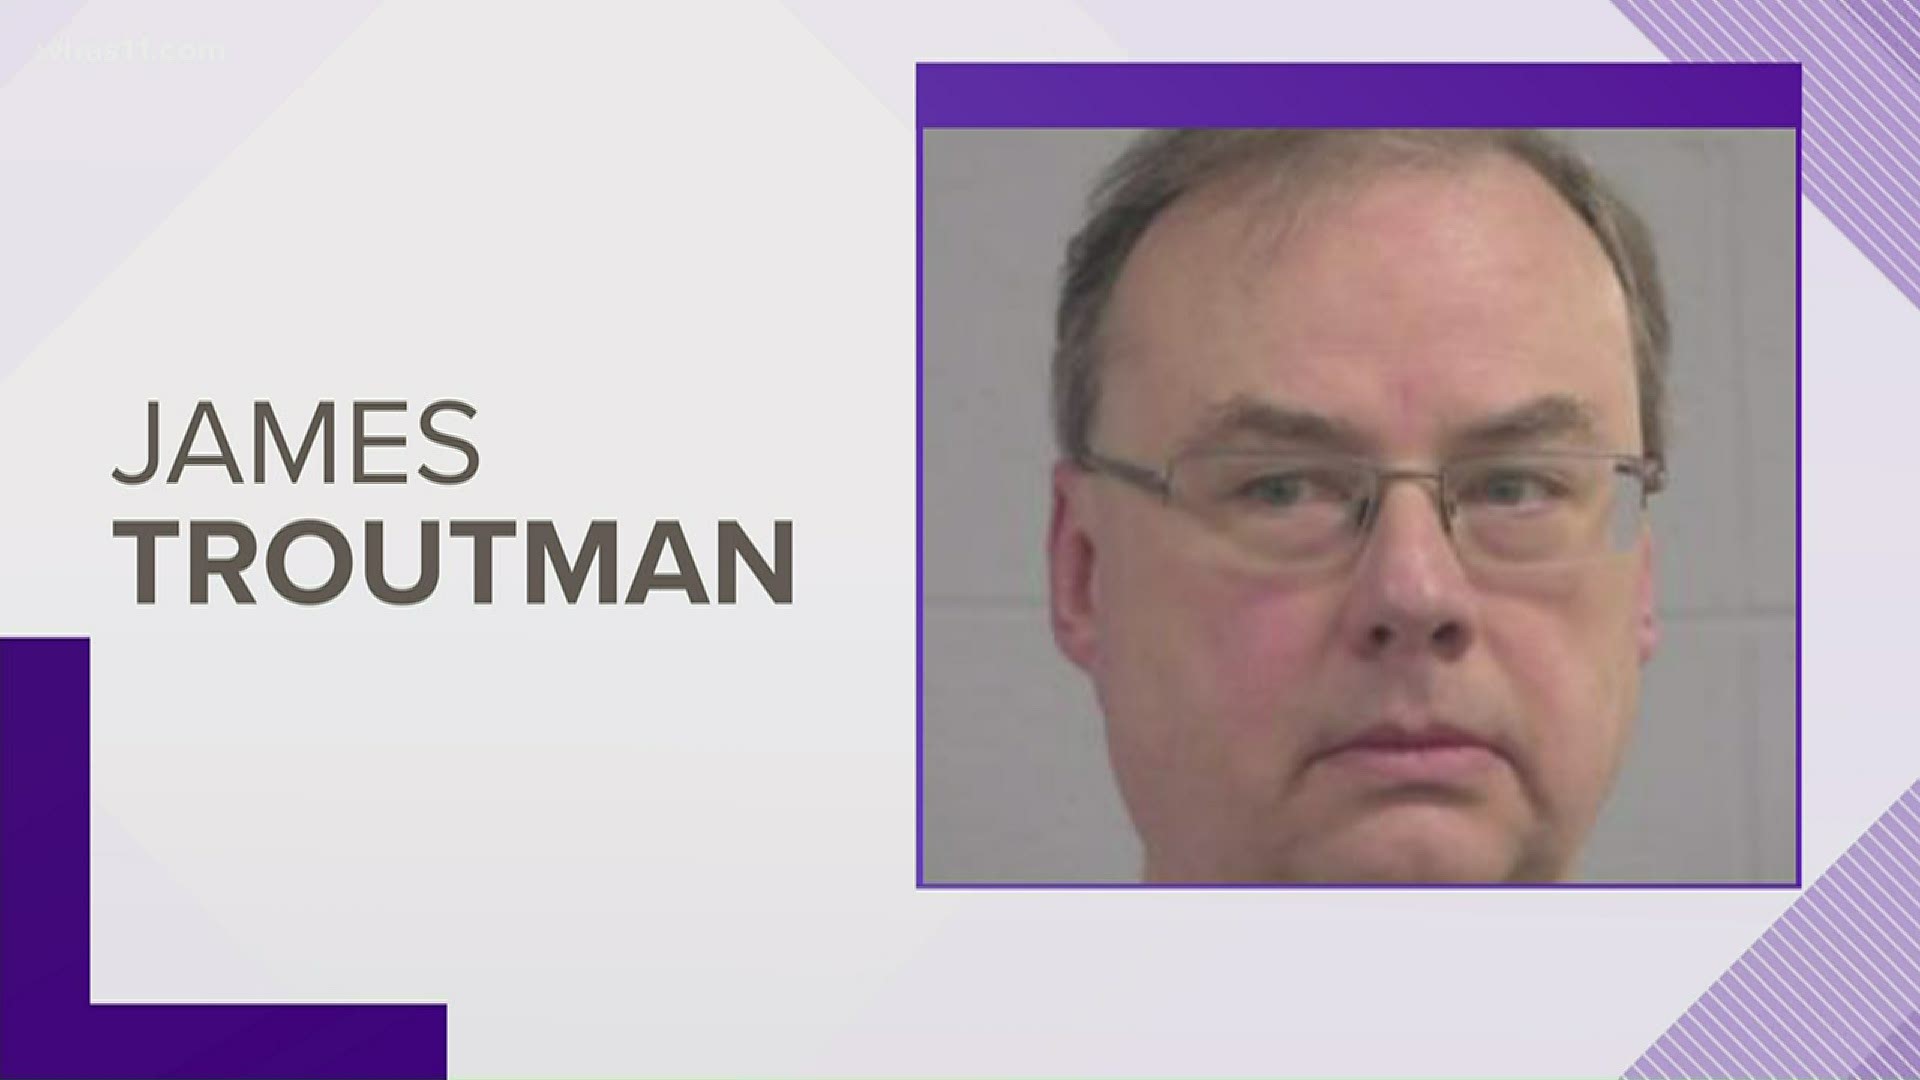 53-year-old James Troutman is charged with terroristic threatening after allegedly making a post on Facebook.